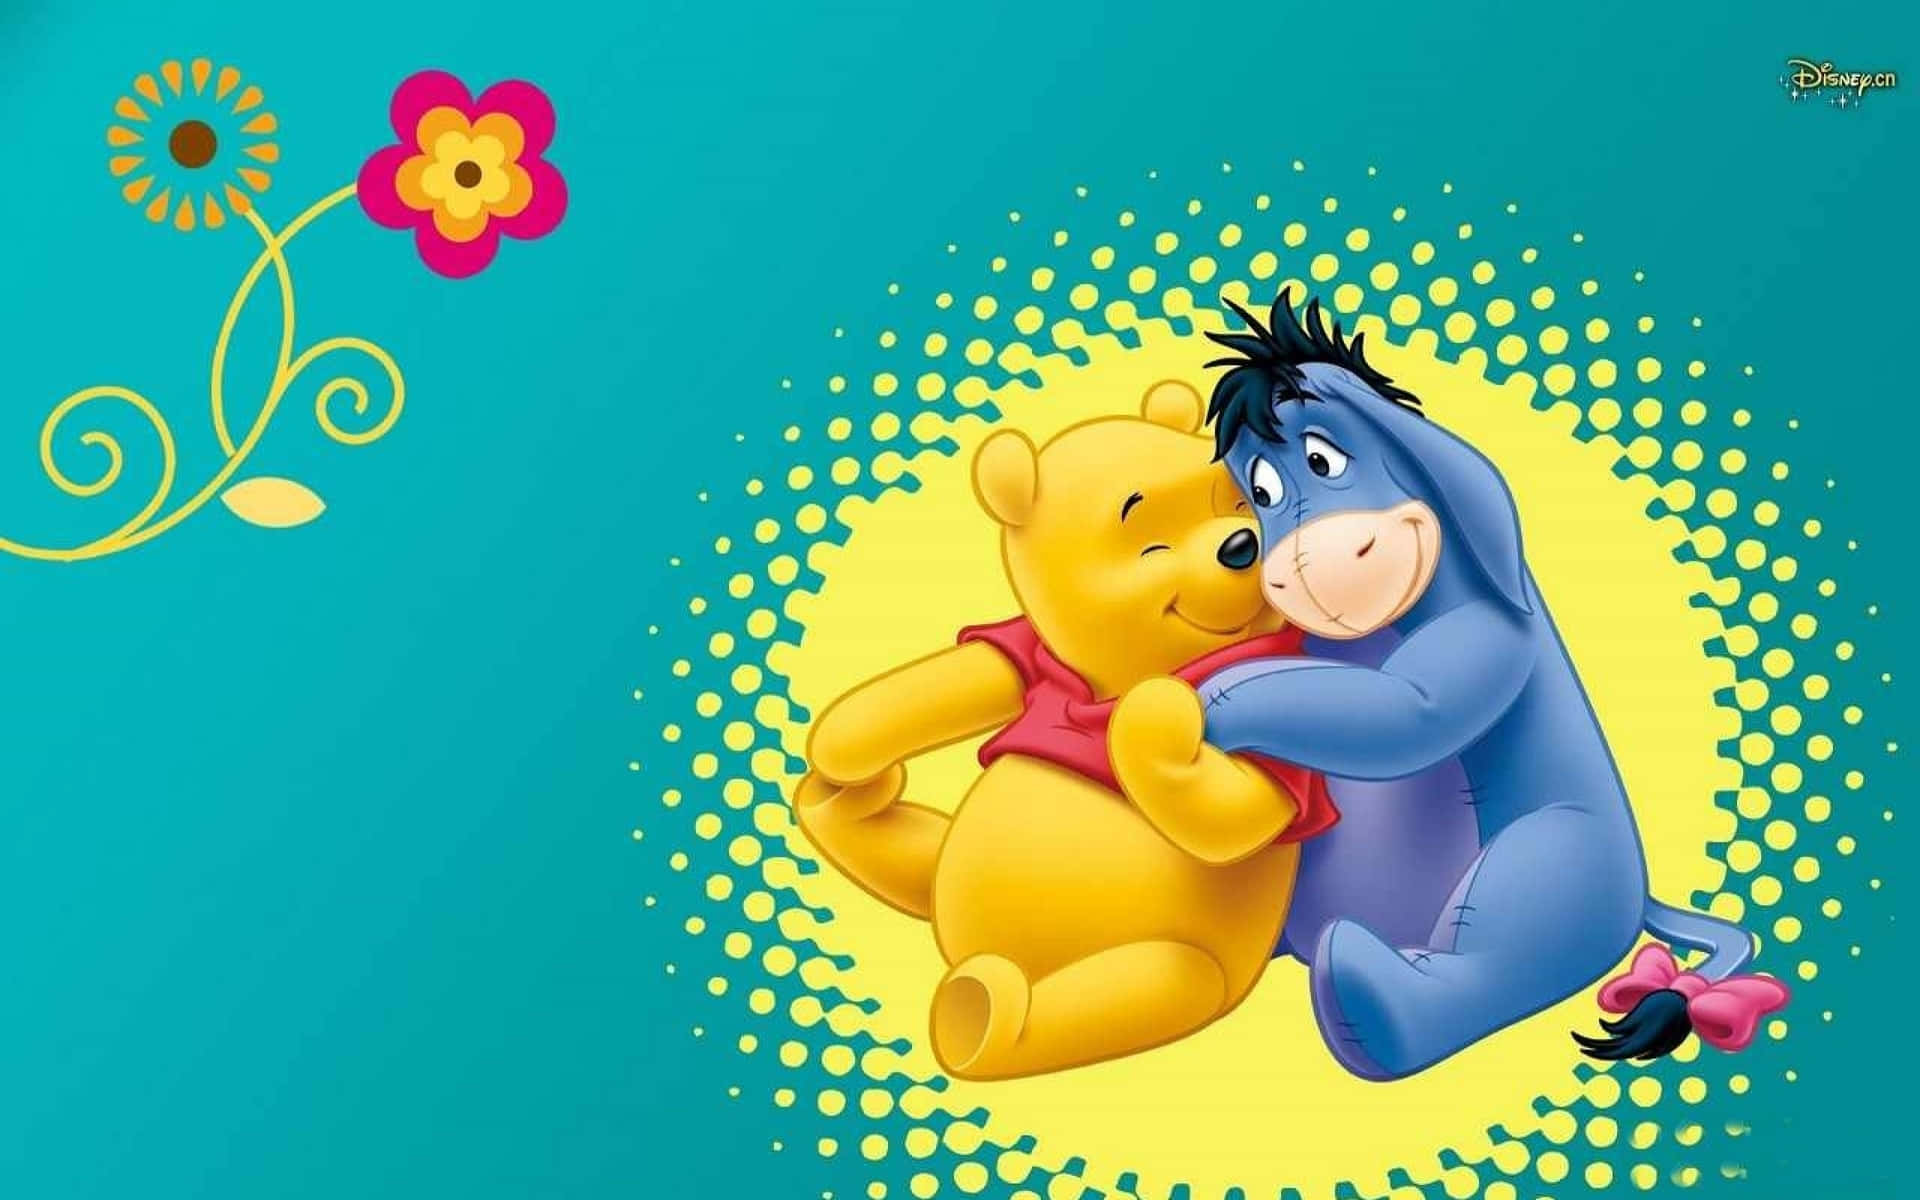 Enjoy The Magical World Of Winnie The Pooh On Your Desktop